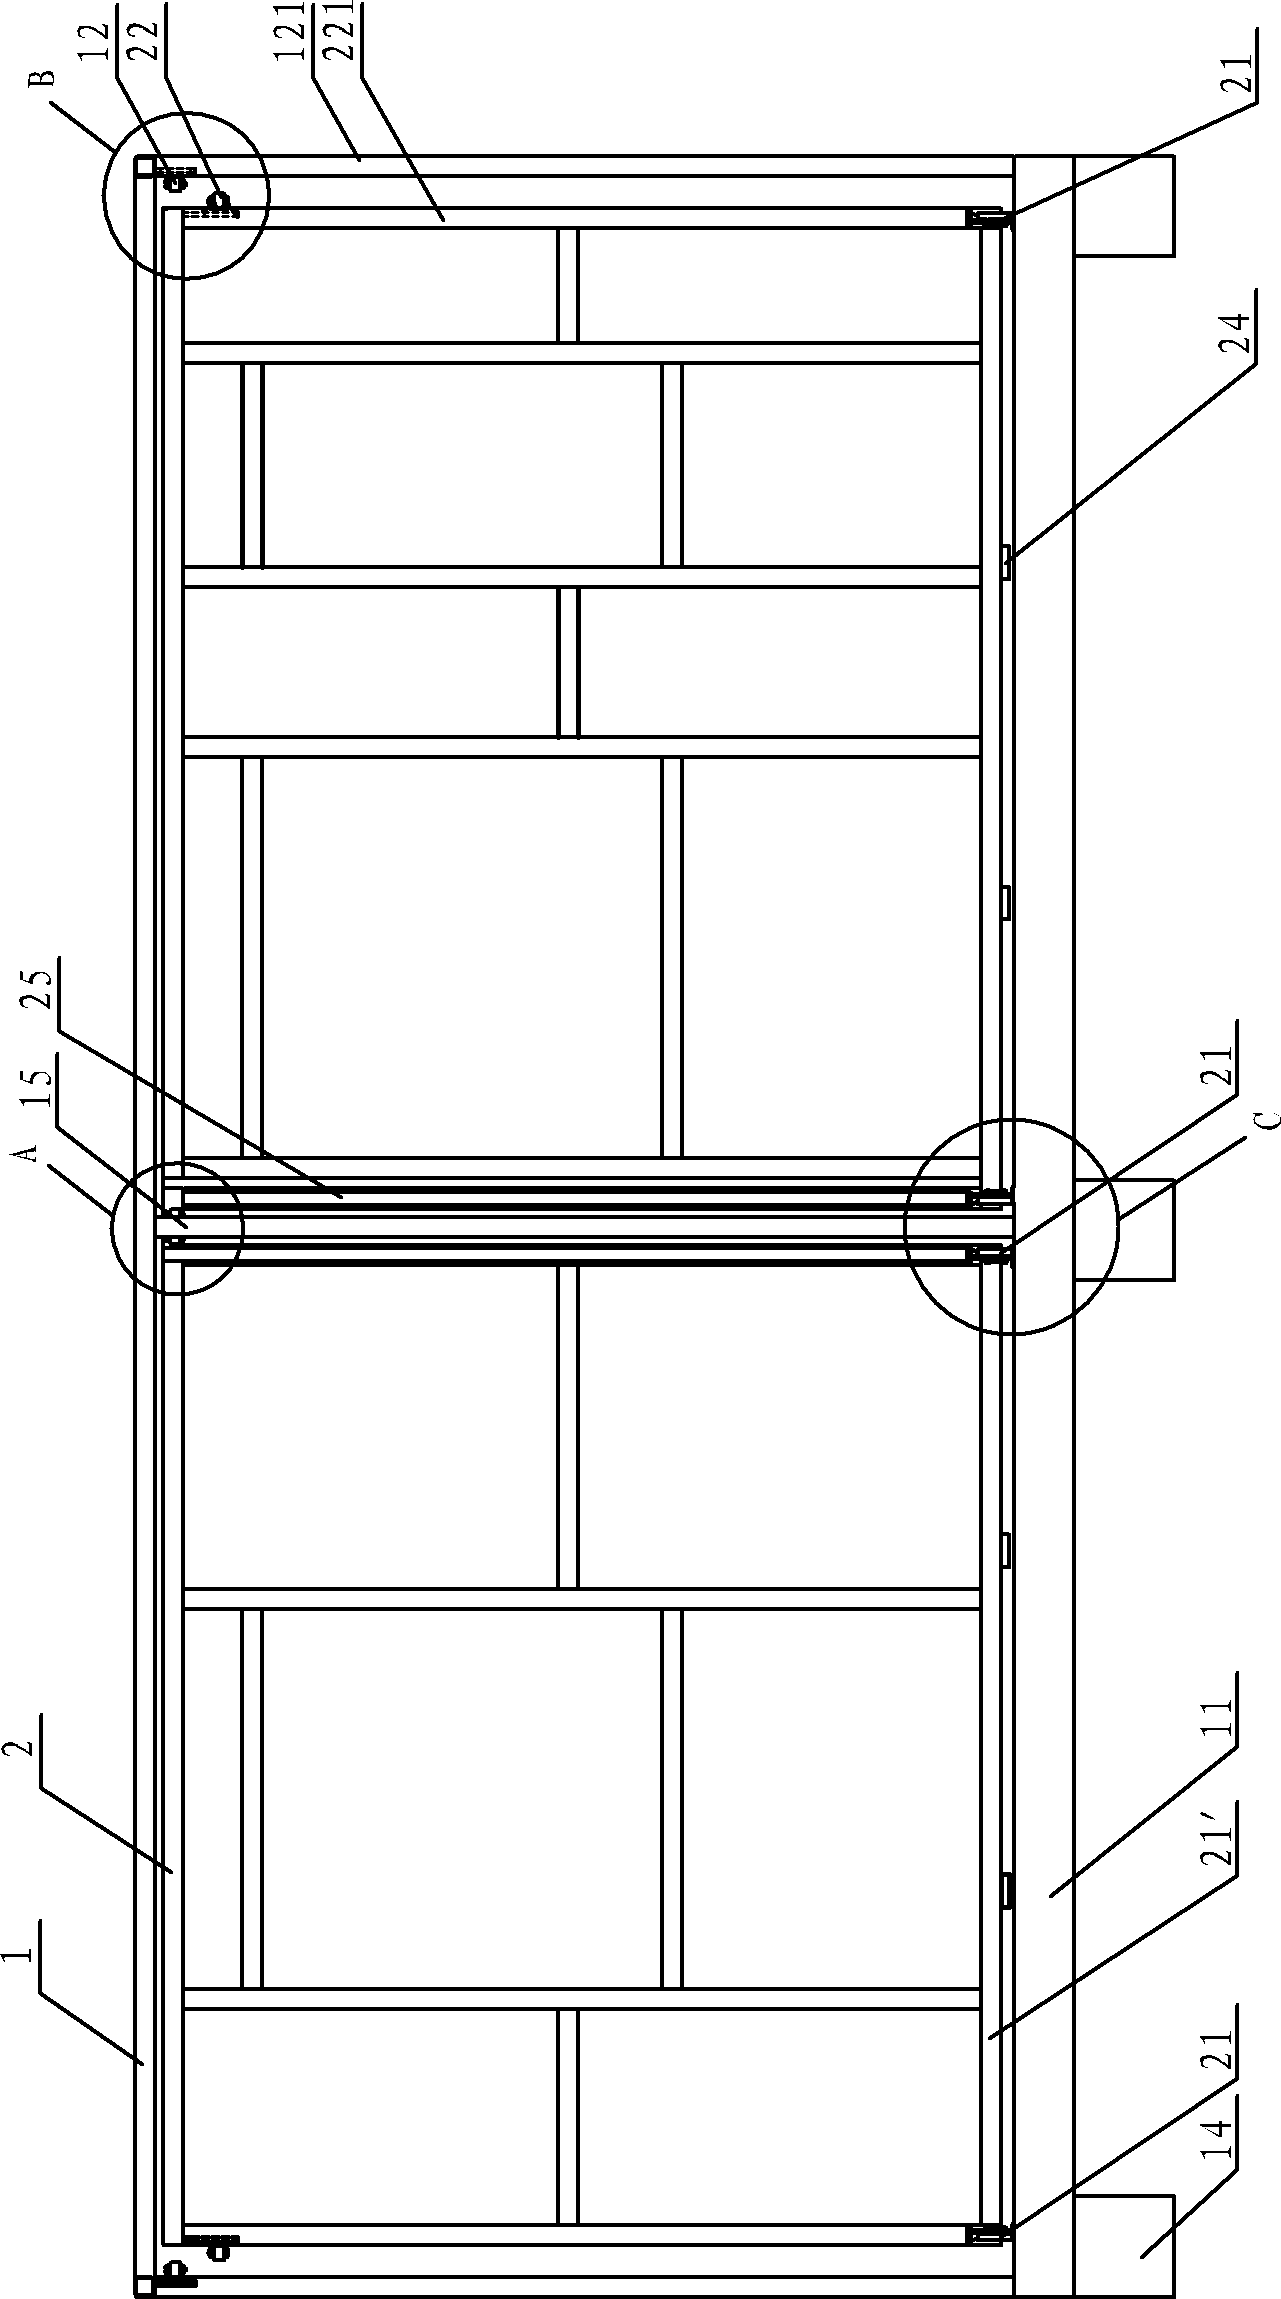 Combination method for movable villa with enlargeable and reducible internal space